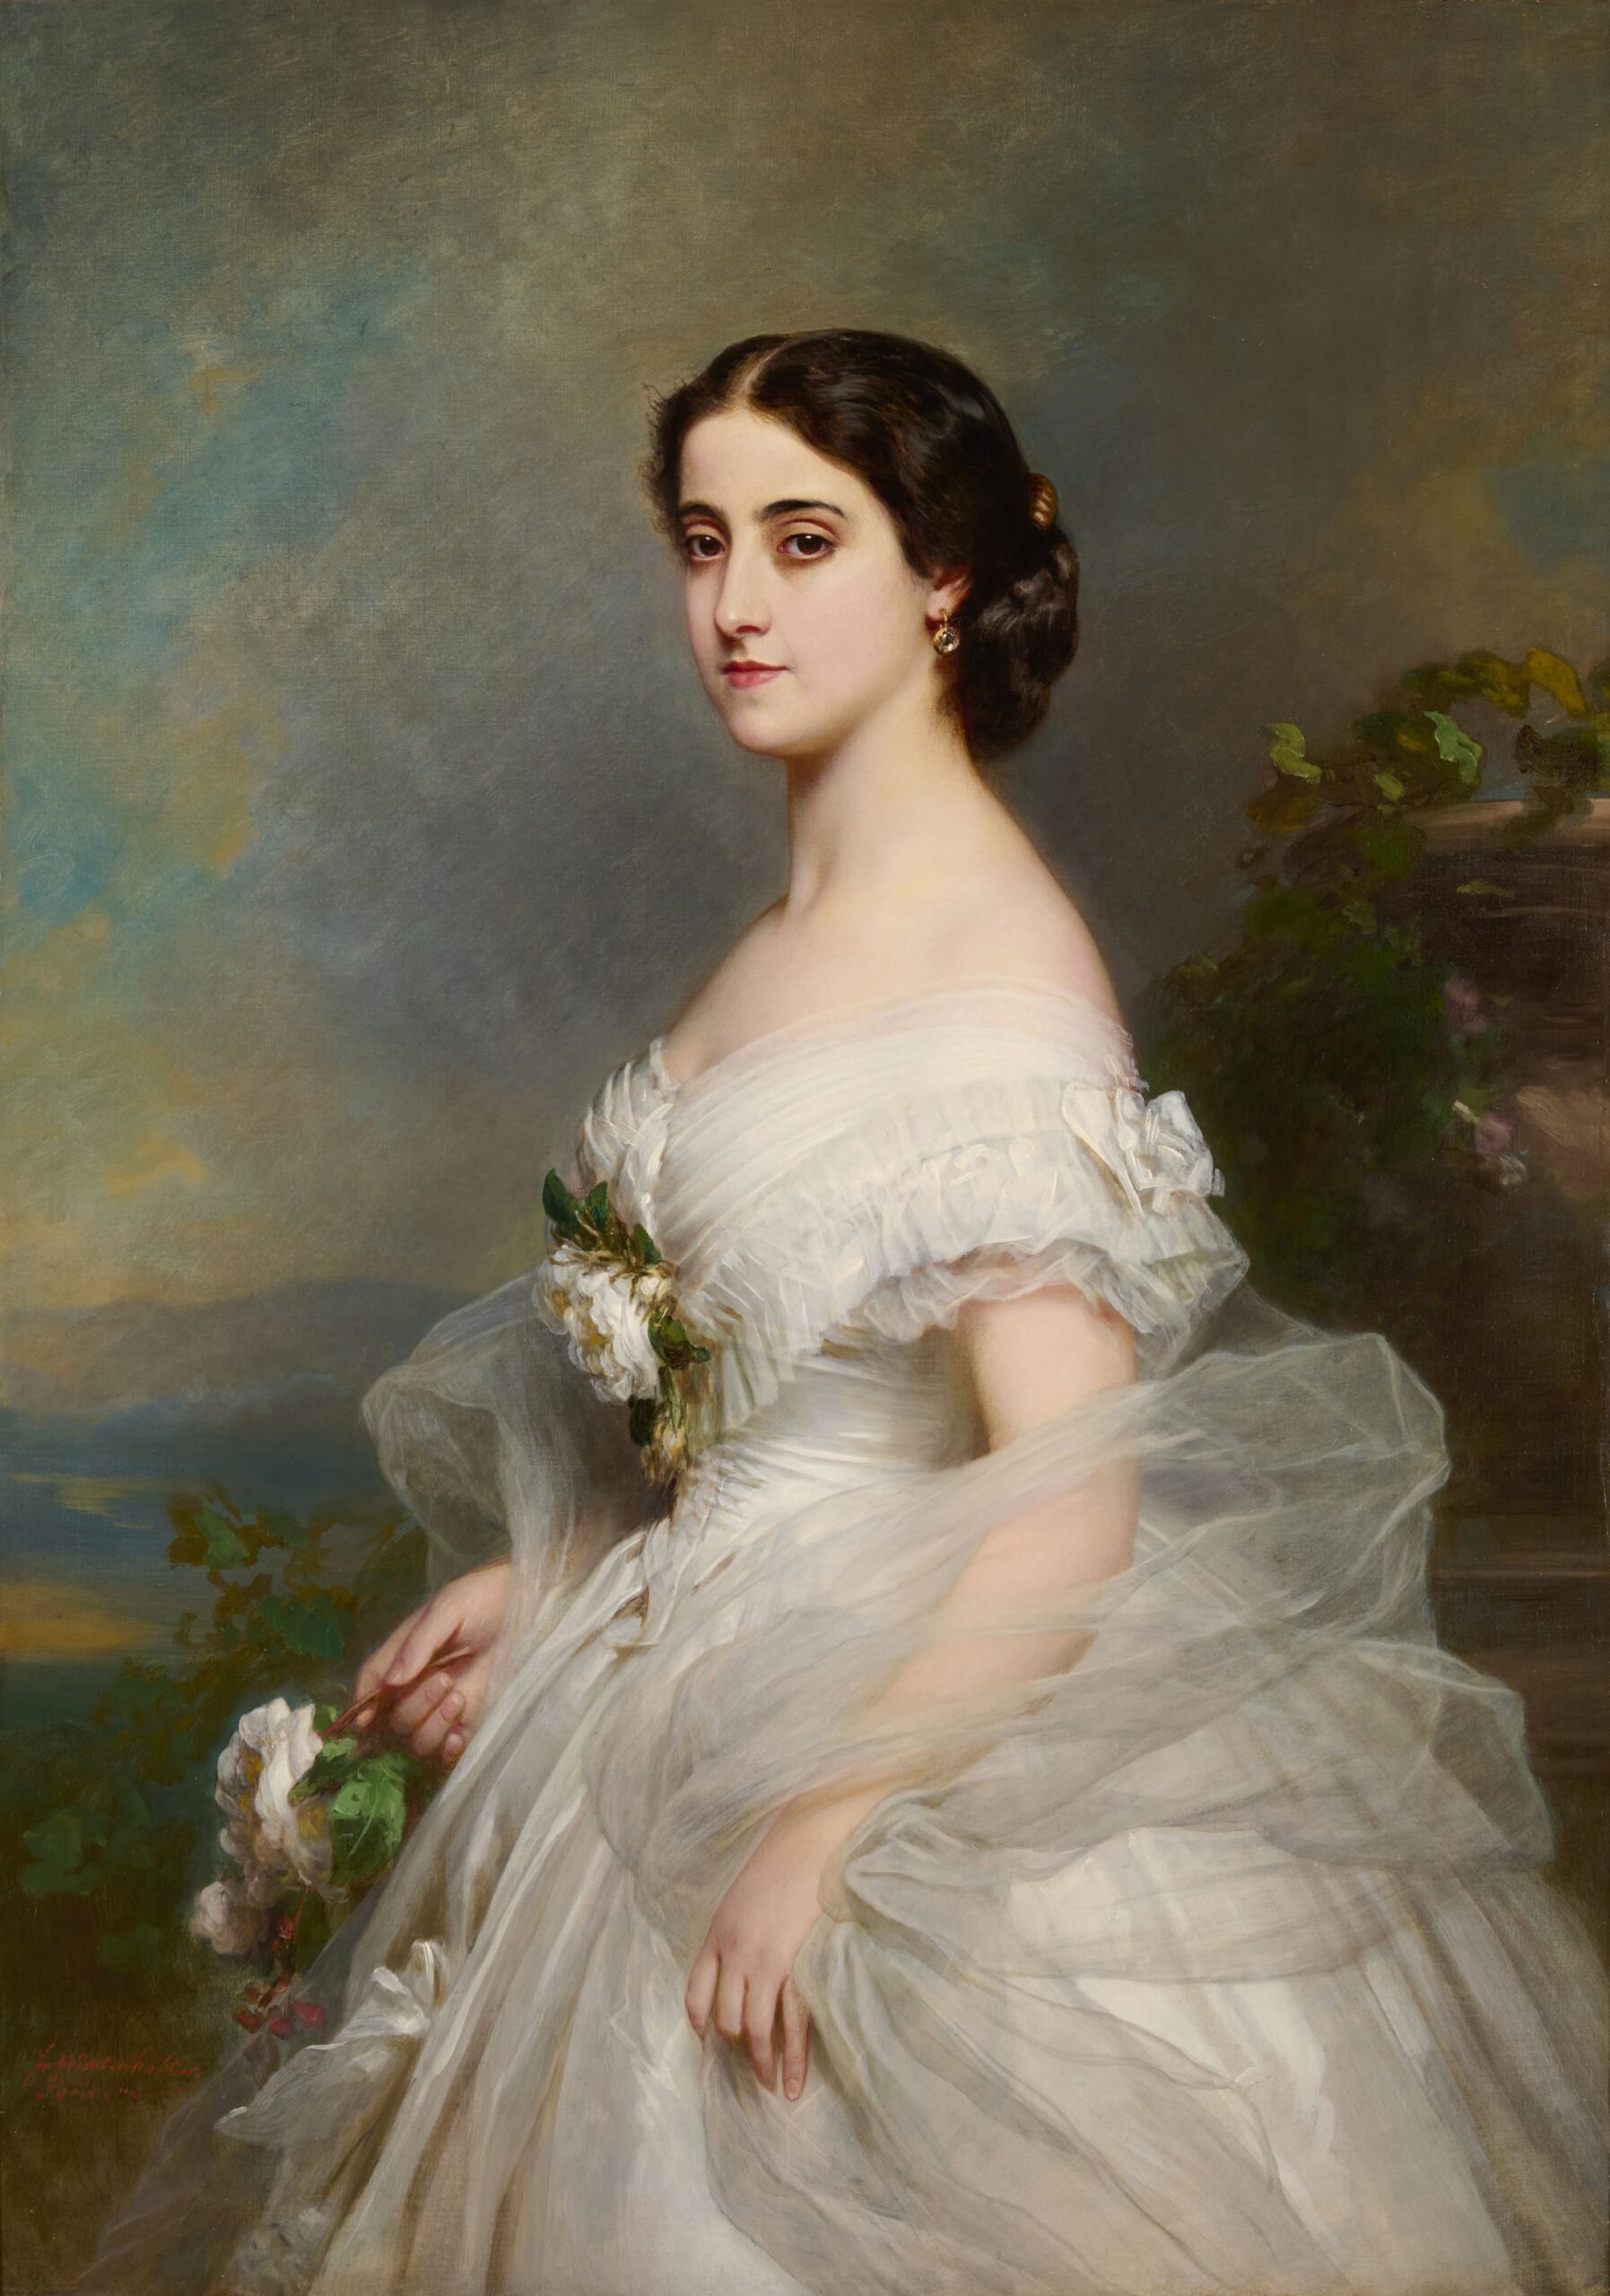 Portrait of Adelina Patti by Franz Winterhalter ca. 1865-70. Photograph reproduced courtesy of Harewood House Trust